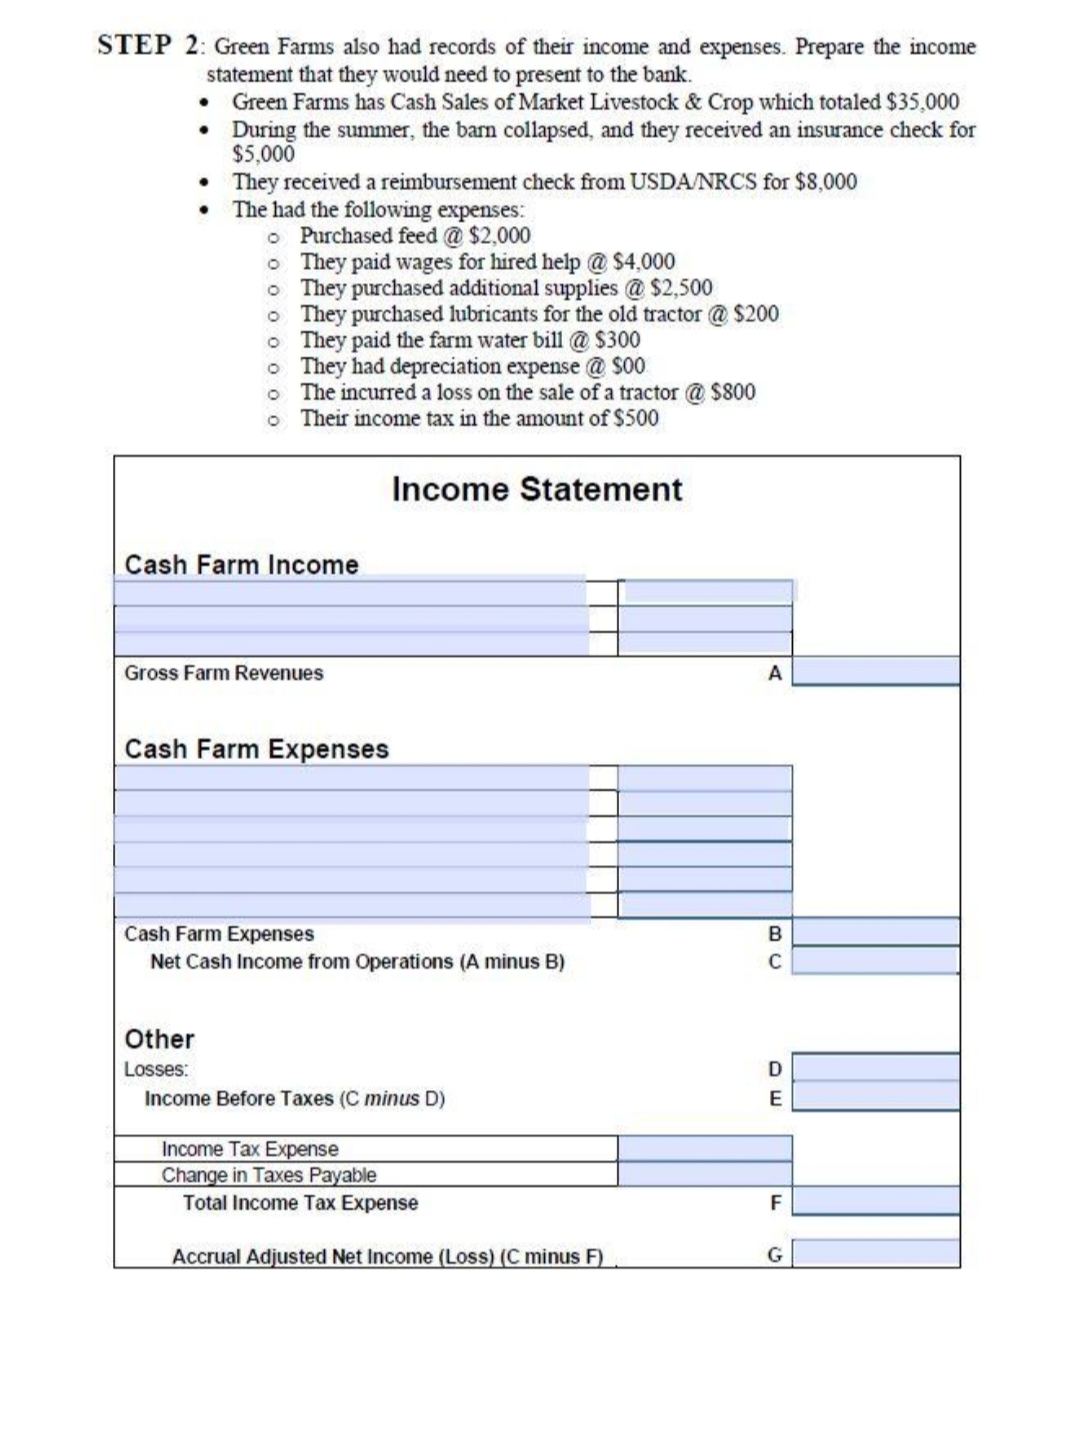 STEP 2: Green Farms also had records of their income and expenses. Prepare the income
statement that they would need to present to the bank.
Green Farms has Cash Sales of Market Livestock & Crop which totaled $35,000
During the summer, the barn collapsed, and they received an insurance check for
$5,000
•
•
●
They received a reimbursement check from USDA/NRCS for $8,000
The had the following expenses:
Purchased feed @ $2,000
They paid wages for hired help @ $4,000
They purchased additional supplies @ $2,500
o
They purchased lubricants for the old tractor @ $200
o They paid the farm water bill @ $300
o They had depreciation expense @ $00
o The incurred a loss on the sale of a tractor @ $800
Their income tax in the amount of $500
o
Income Statement
Cash Farm Income
Gross Farm Revenues
Cash Farm Expenses
Cash Farm Expenses
Net Cash Income from Operations (A minus B)
Other
Losses:
Income Before Taxes (C minus D)
Income Tax Expense
Change in Taxes Payable
Total Income Tax Expense
Accrual Adjusted Net Income (Loss) (C minus F)
A
B
C
D
E
F
G